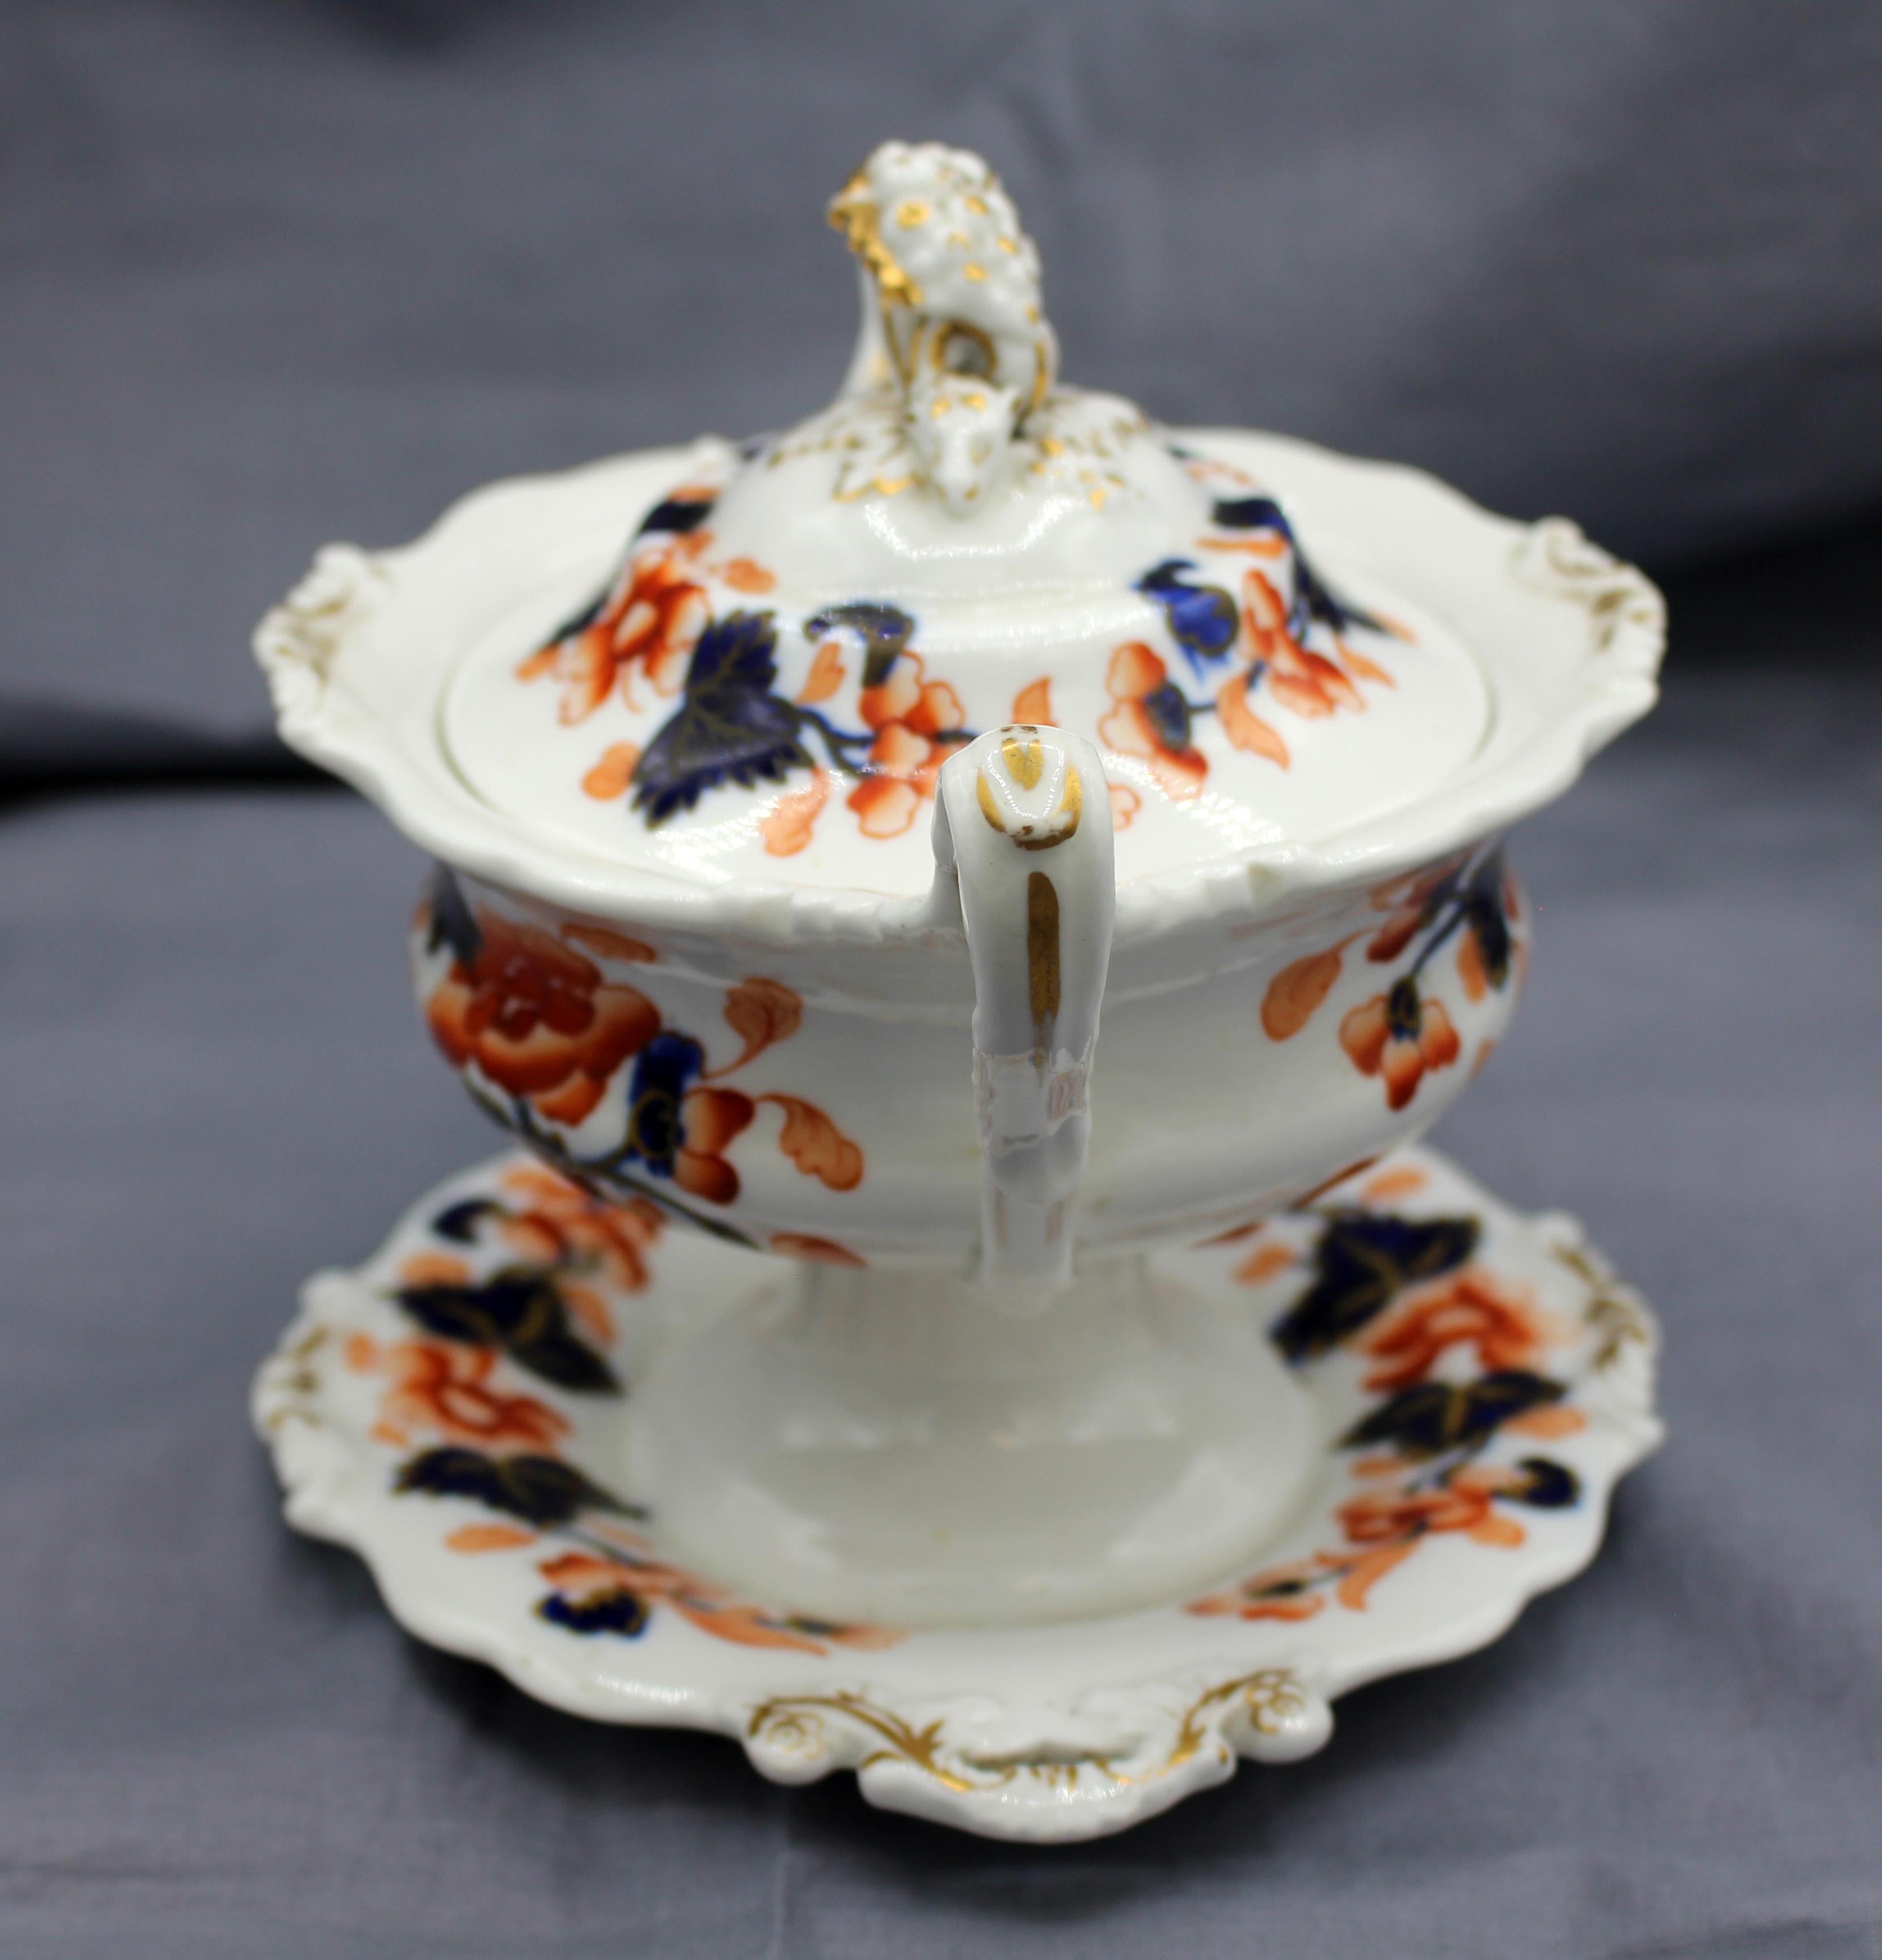 Circa 1830 English Classical period ironstone sauce tureen, integral stand & cover, Imari pattern. Finial a cornucopia with head of a fawn tip.

Whitehall Antiques is a family business that has been a major source for the selective buyer for over 90